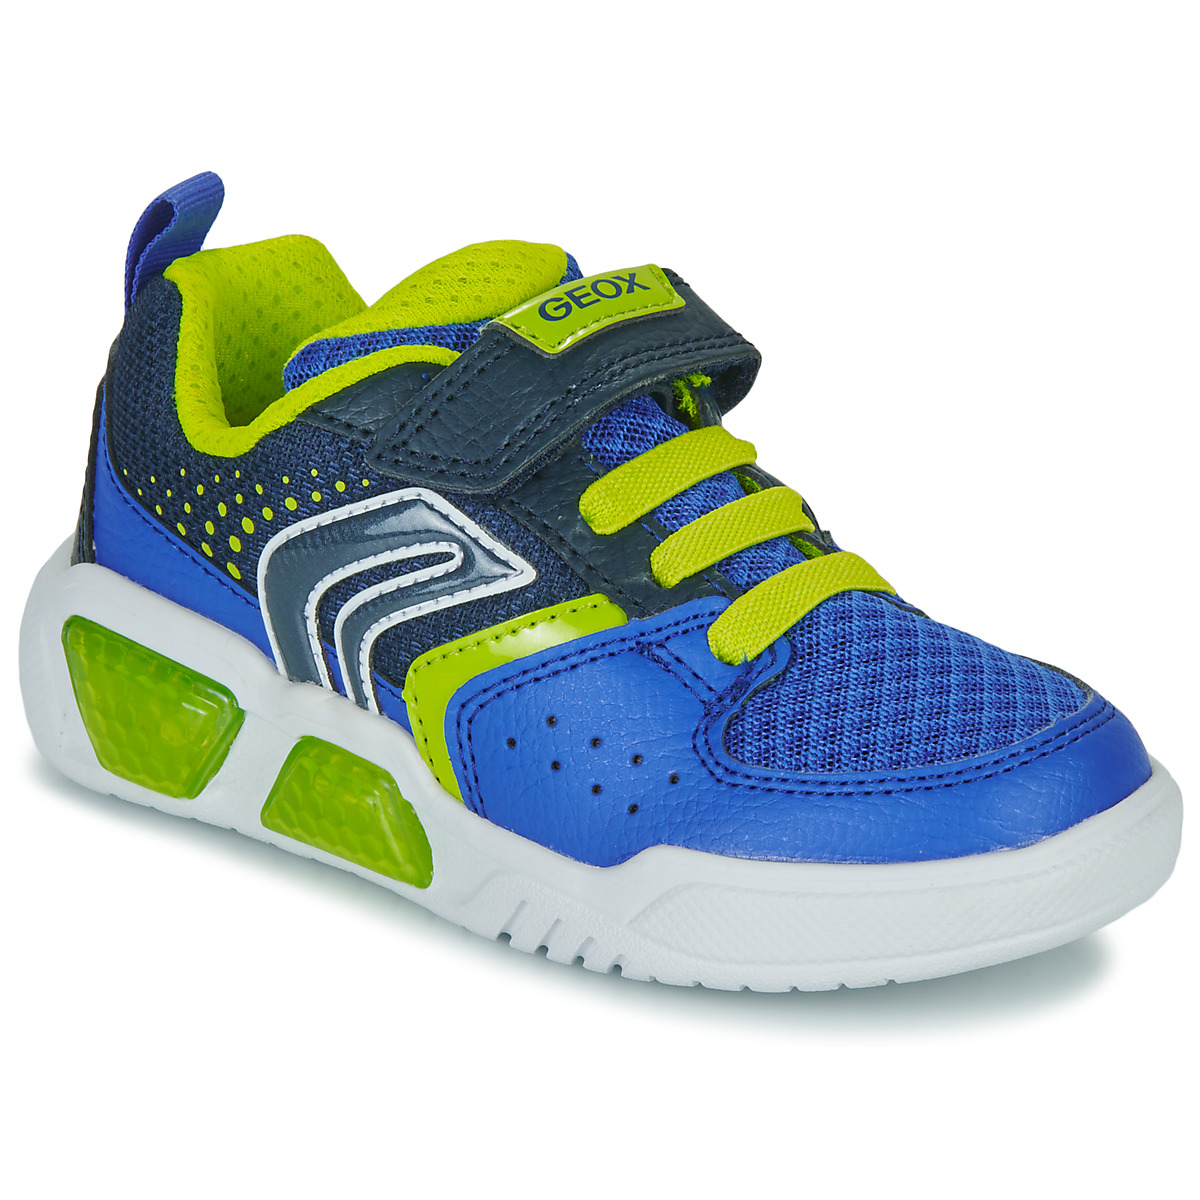 J Blue BOY Fast - Geox top Green - ! 57,60 Europe / Child trainers € Shoes | Spartoo Low delivery ILLUMINUS